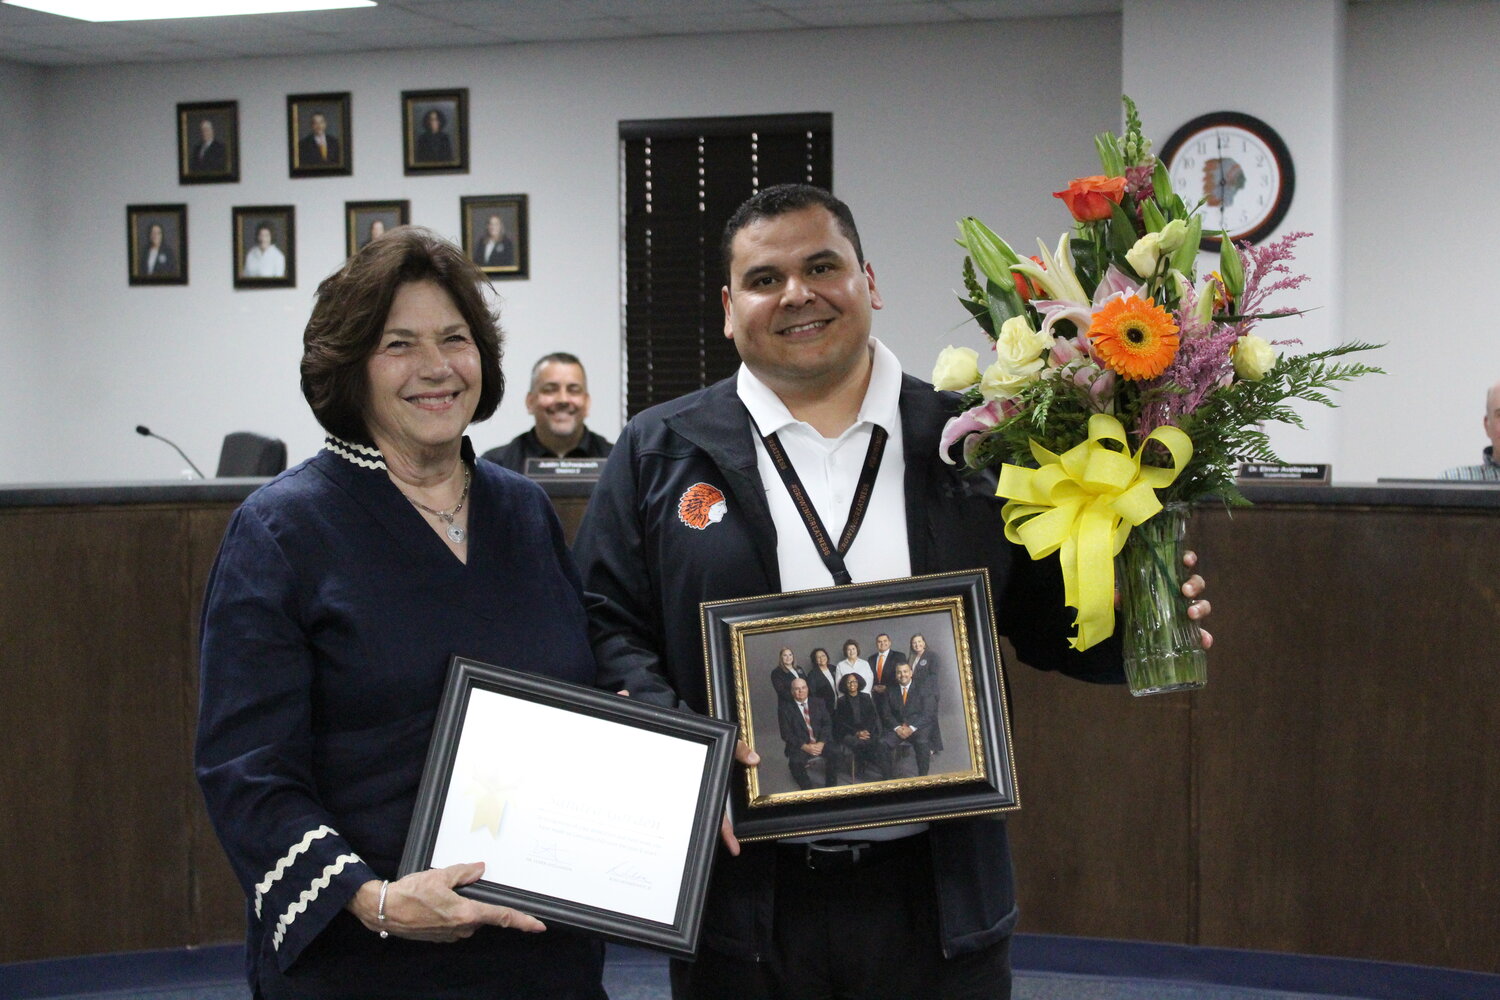 Sandra Gorden with GISD Superintendent Dr. Elmer Avellaneda. Avellaneda gave Gorden a special recognition from the school district for her service on the school board Monday, May 12.